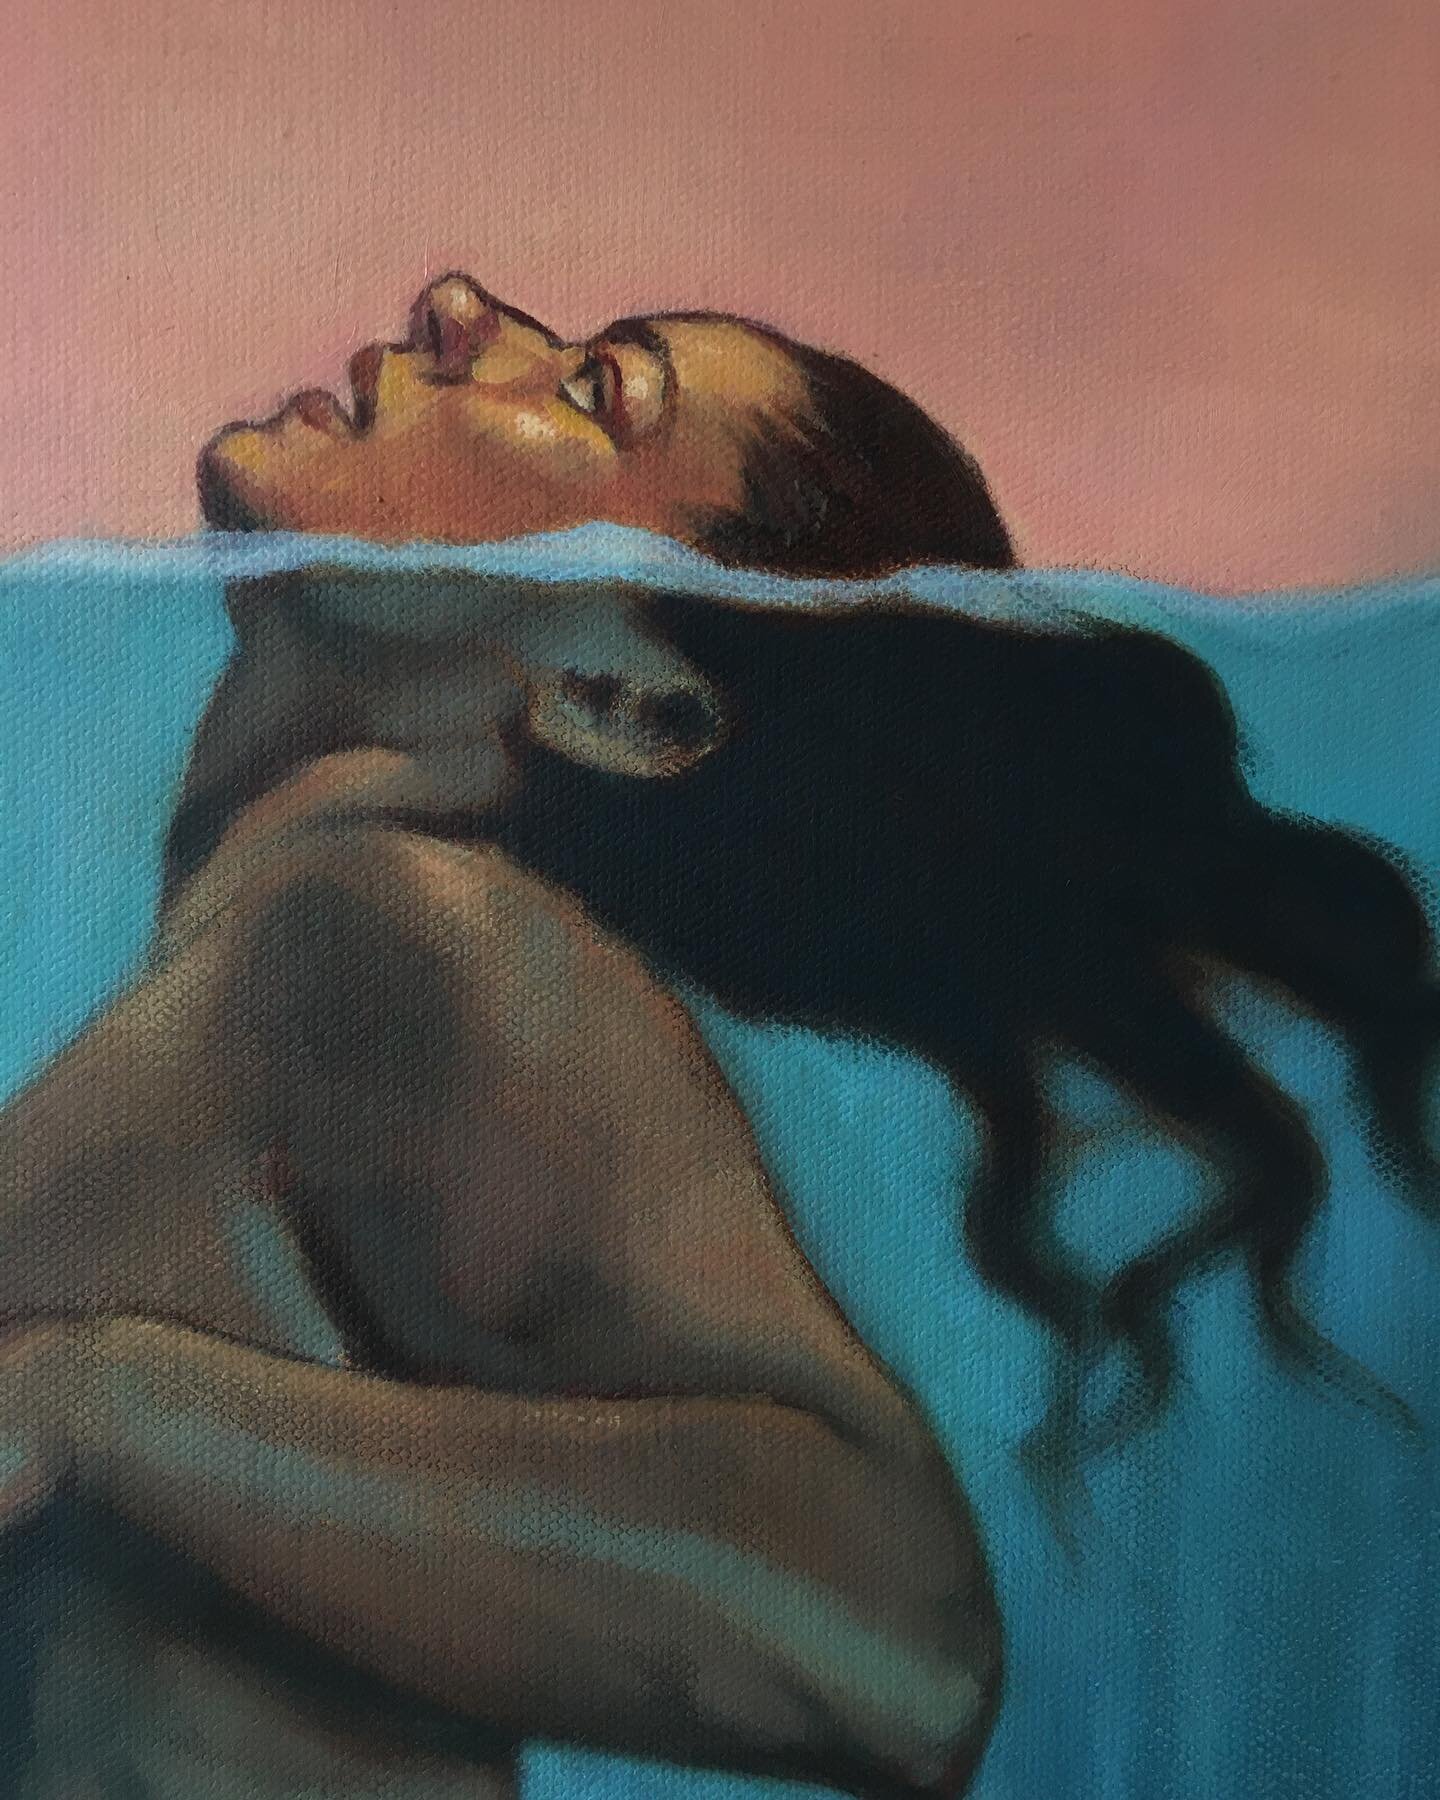 Work in progress detail of 1 of 2 of the works created for the upcoming &lsquo;Undercurrents&rsquo; exhibition with @wowxwow_art showing next month. 

Mailing list subscribers - keep an eye on your inboxes this week, both of the new works will be rev